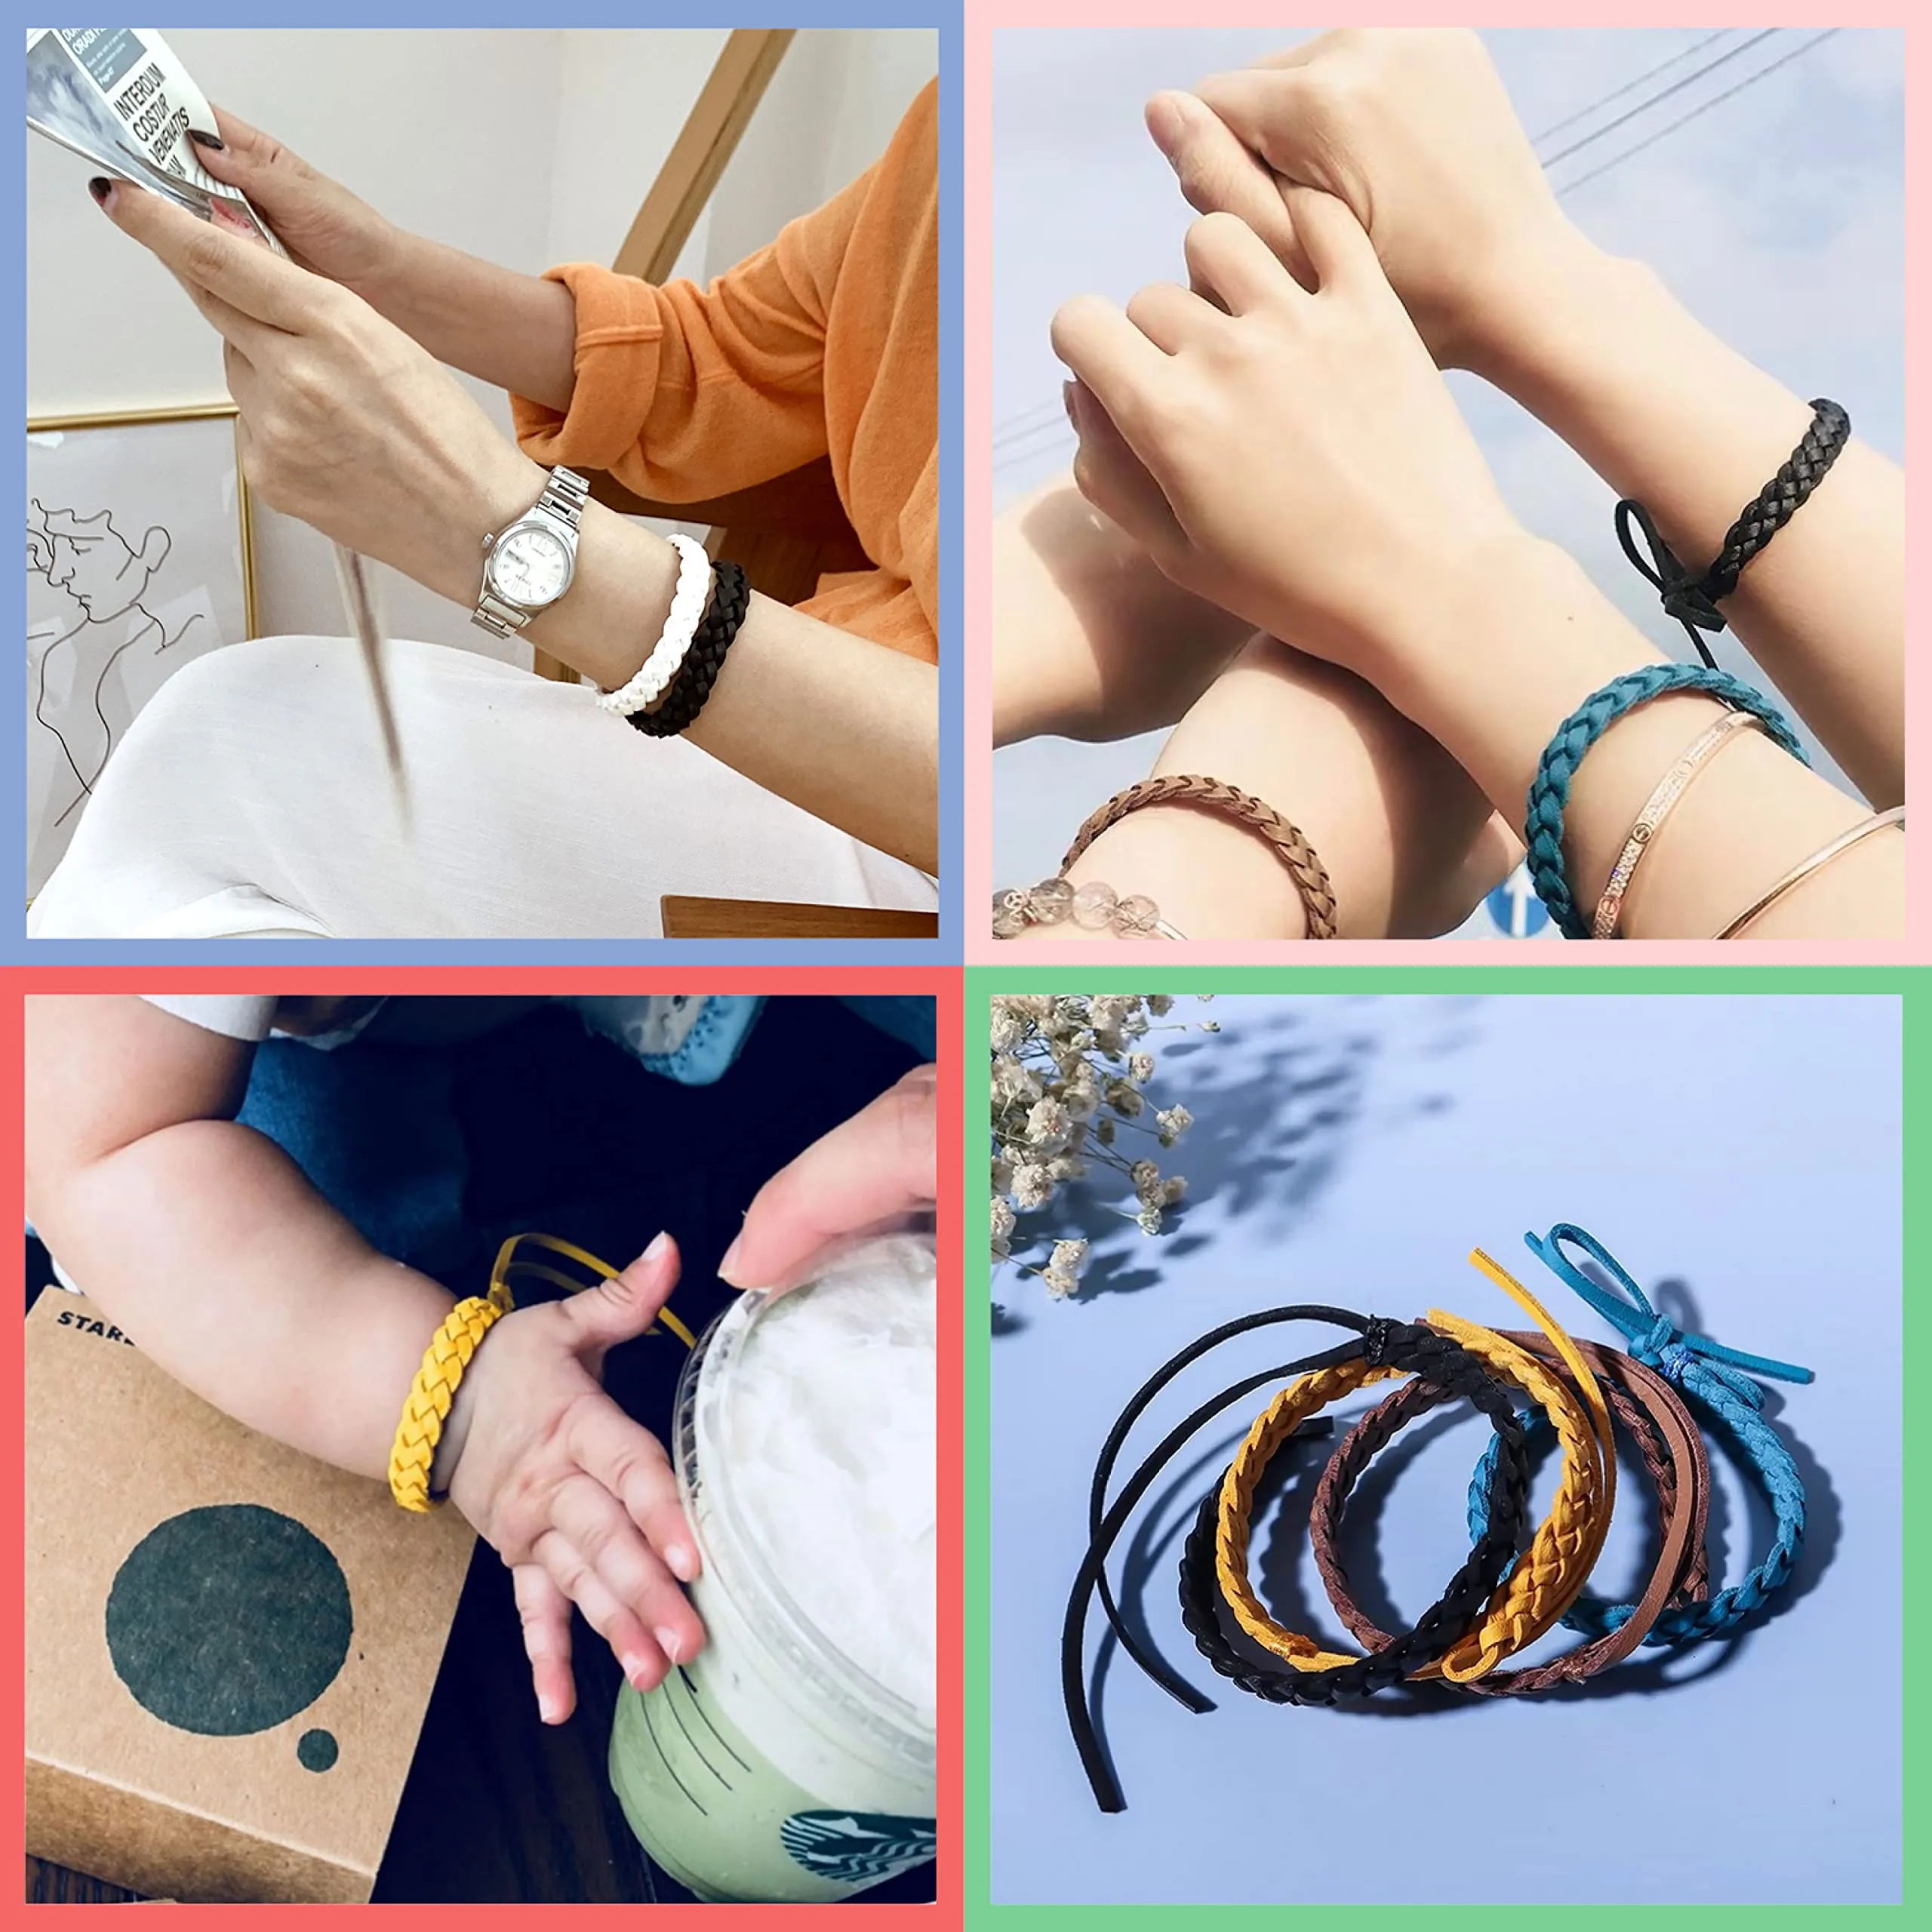 mosquito repellent bracelets solid color individually wrapped leather insect bug repellent wrist bands for kids adults outdoor camping fishing traveling